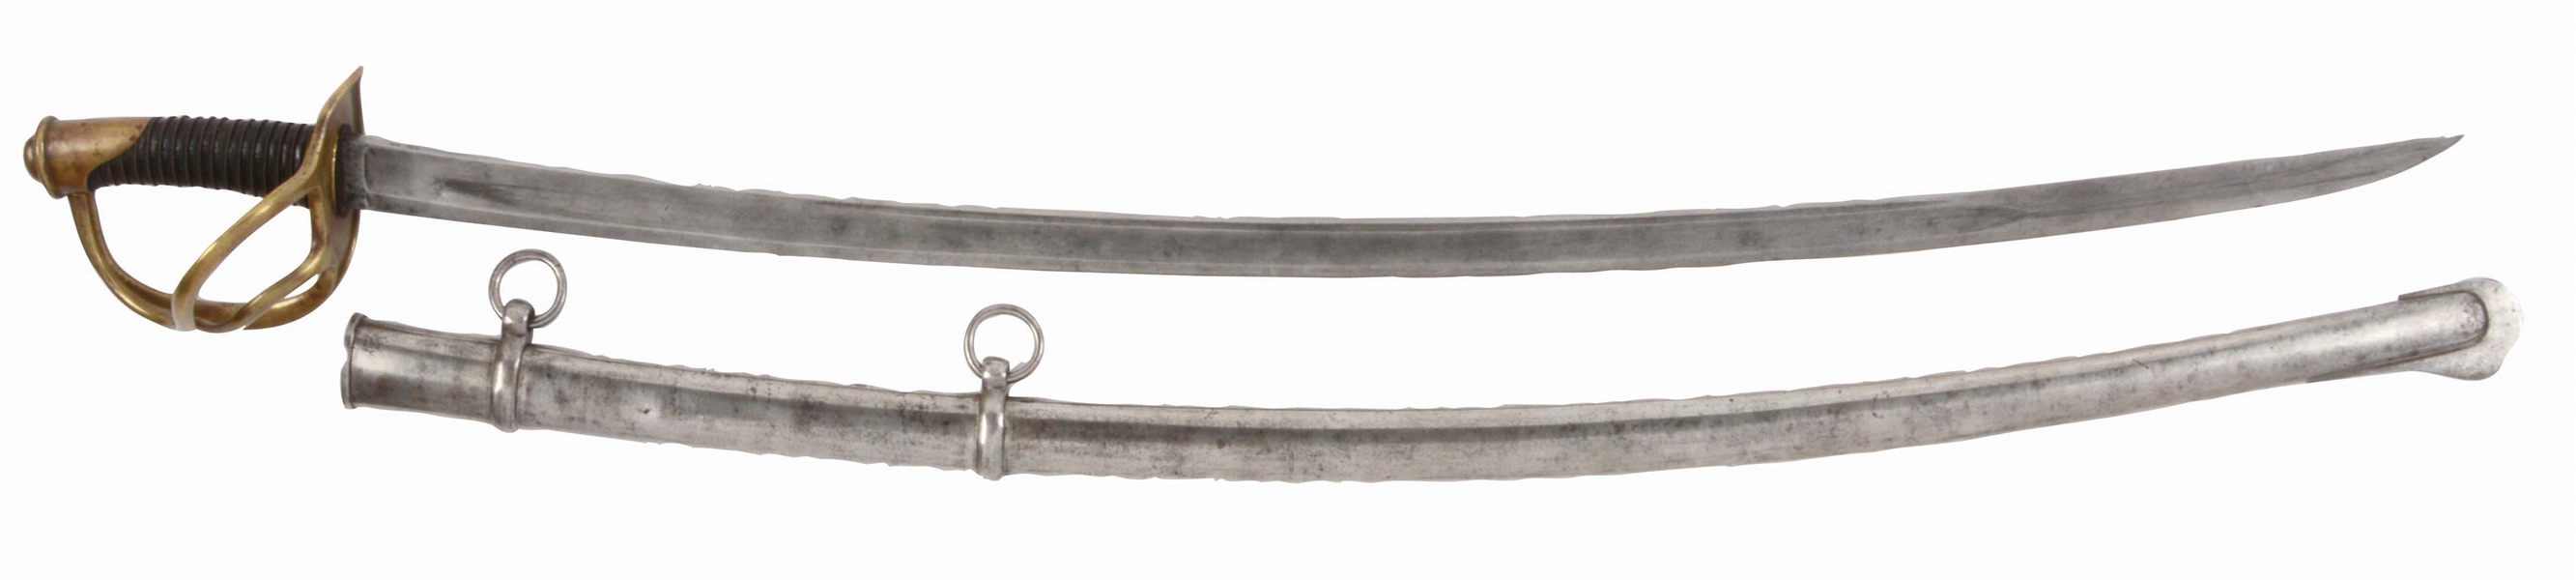 SCHNITZLER AND KIRSCHBAUM MANUFACTURED 1840 CAVALRY OFFICERS LIGHT CAVALRY SABER, PICTURED ON PAGE 374 OF THILLMANS BOOK ON CAVALRY AND ARTILLERY SABERS.